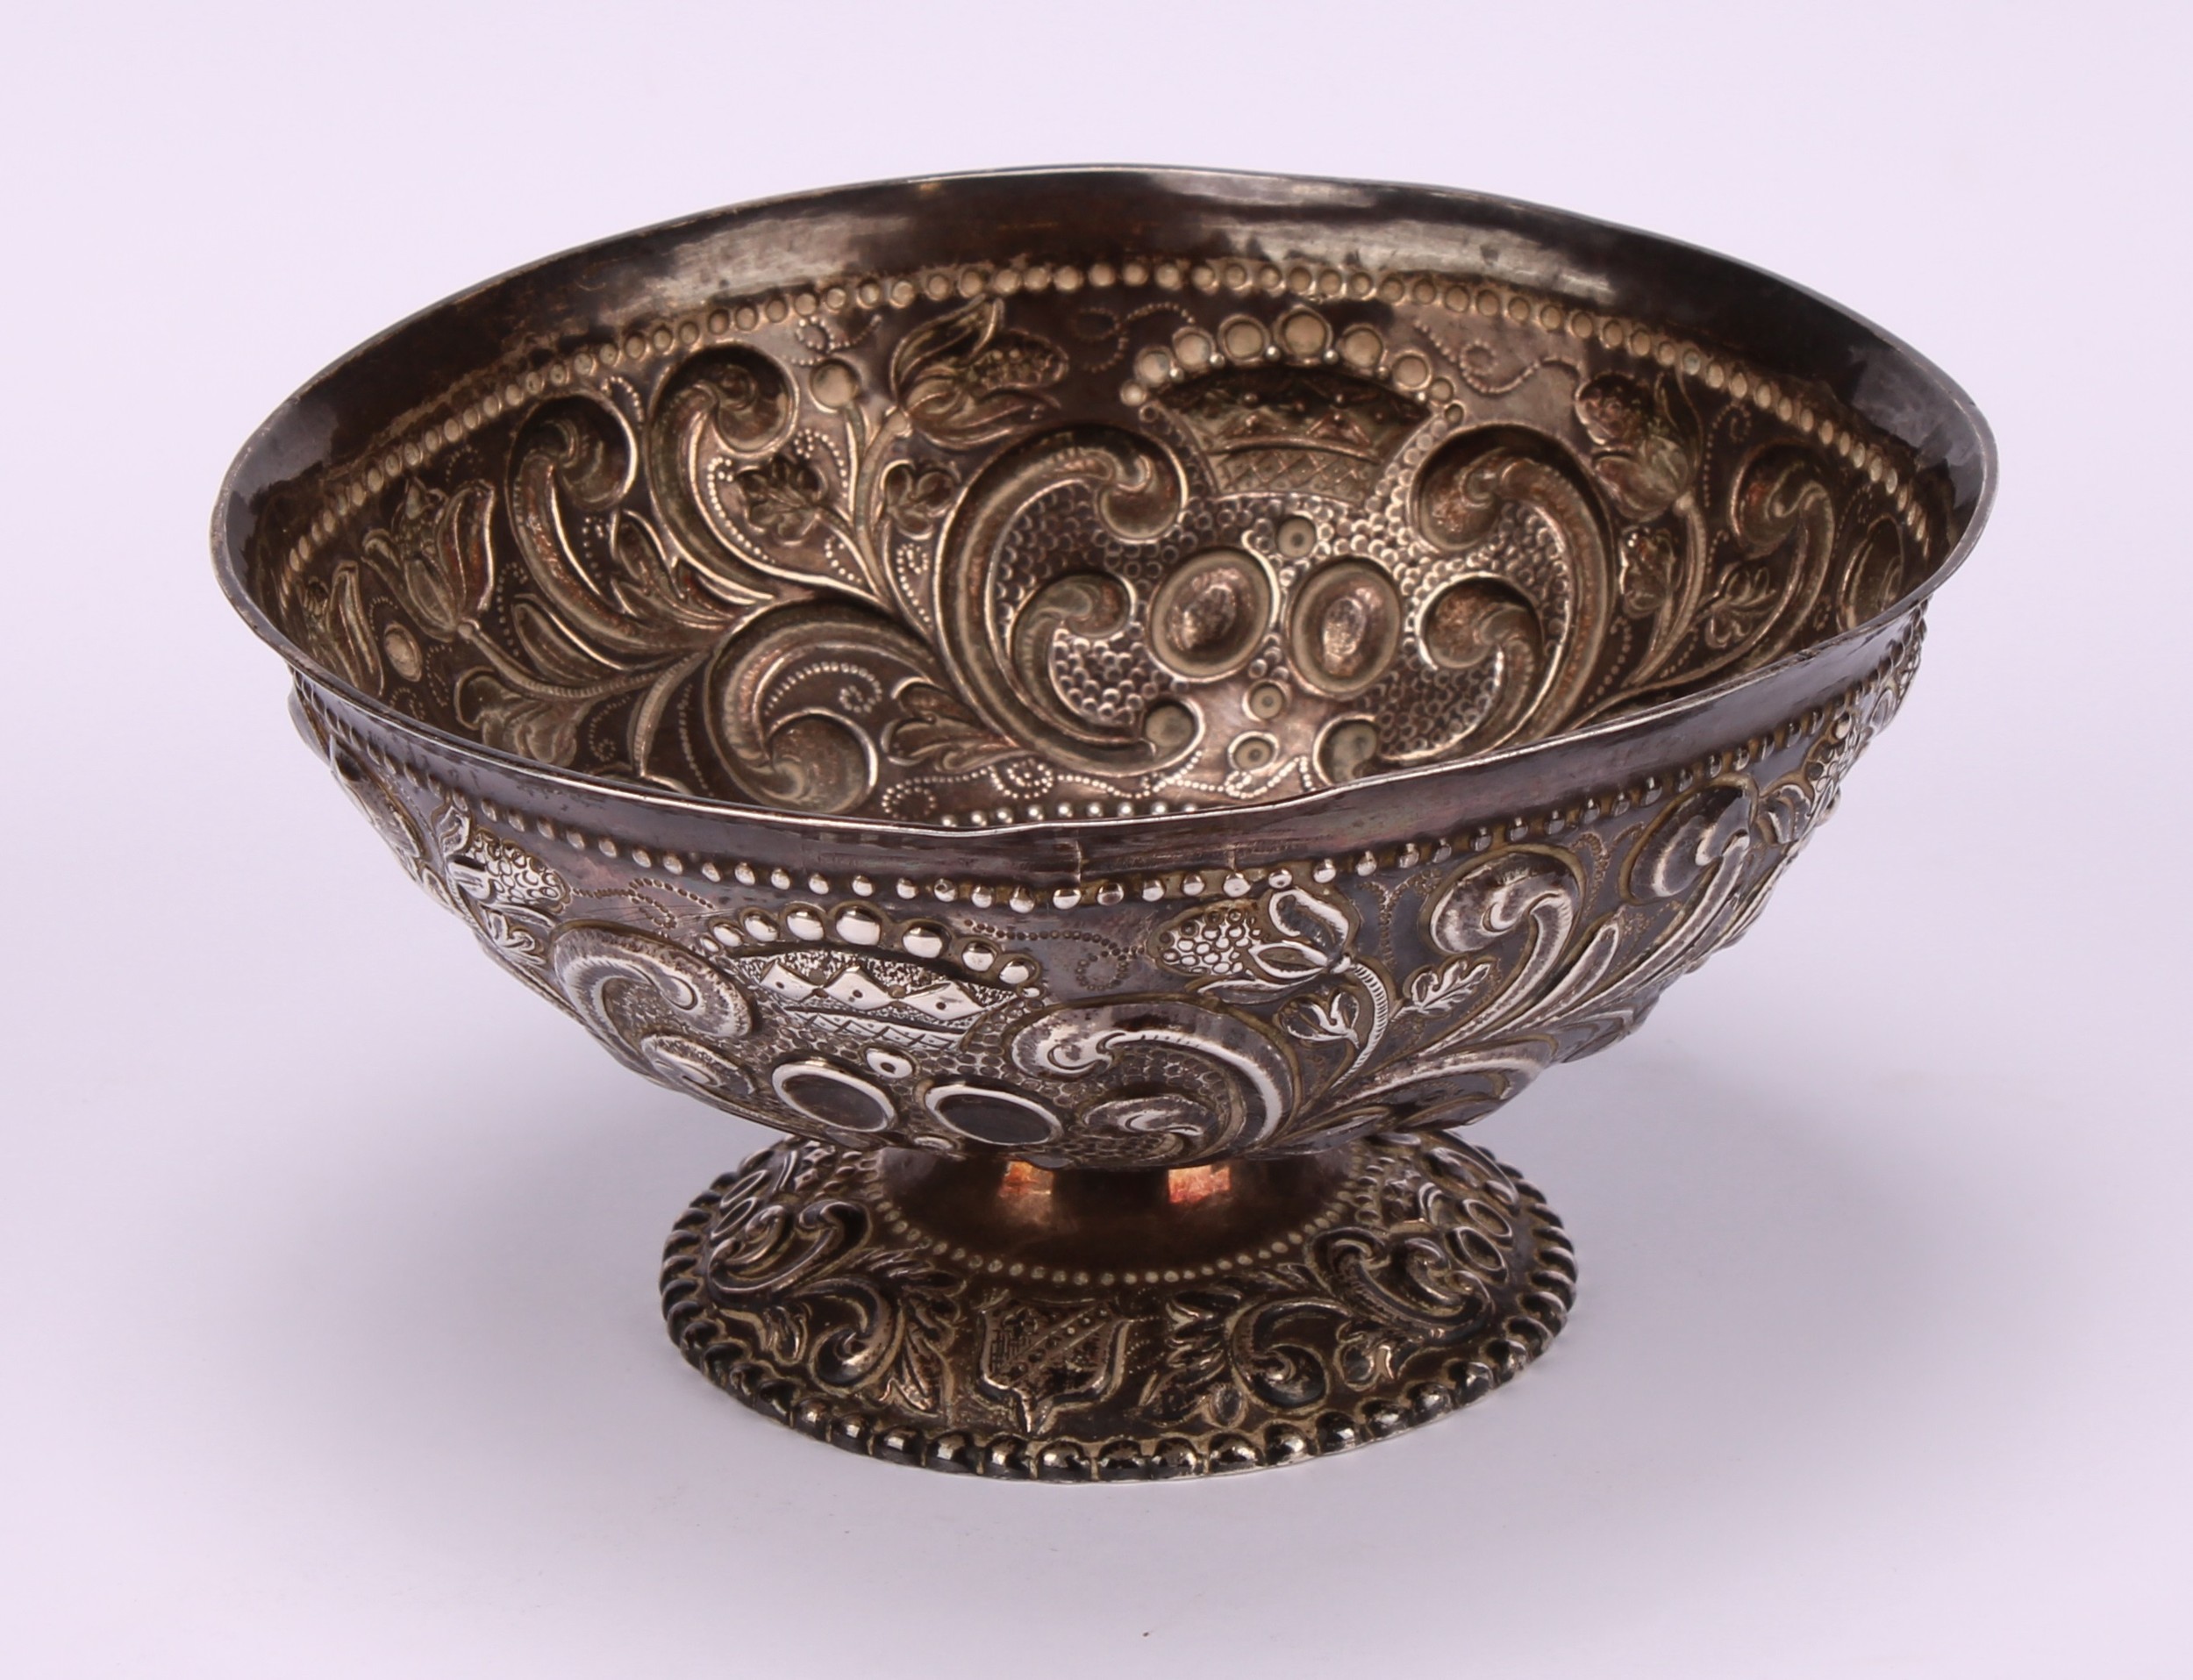 A 19th century Dutch silver pedestal bowl, chased with scrolling foliage and stylised crowns - Image 2 of 3